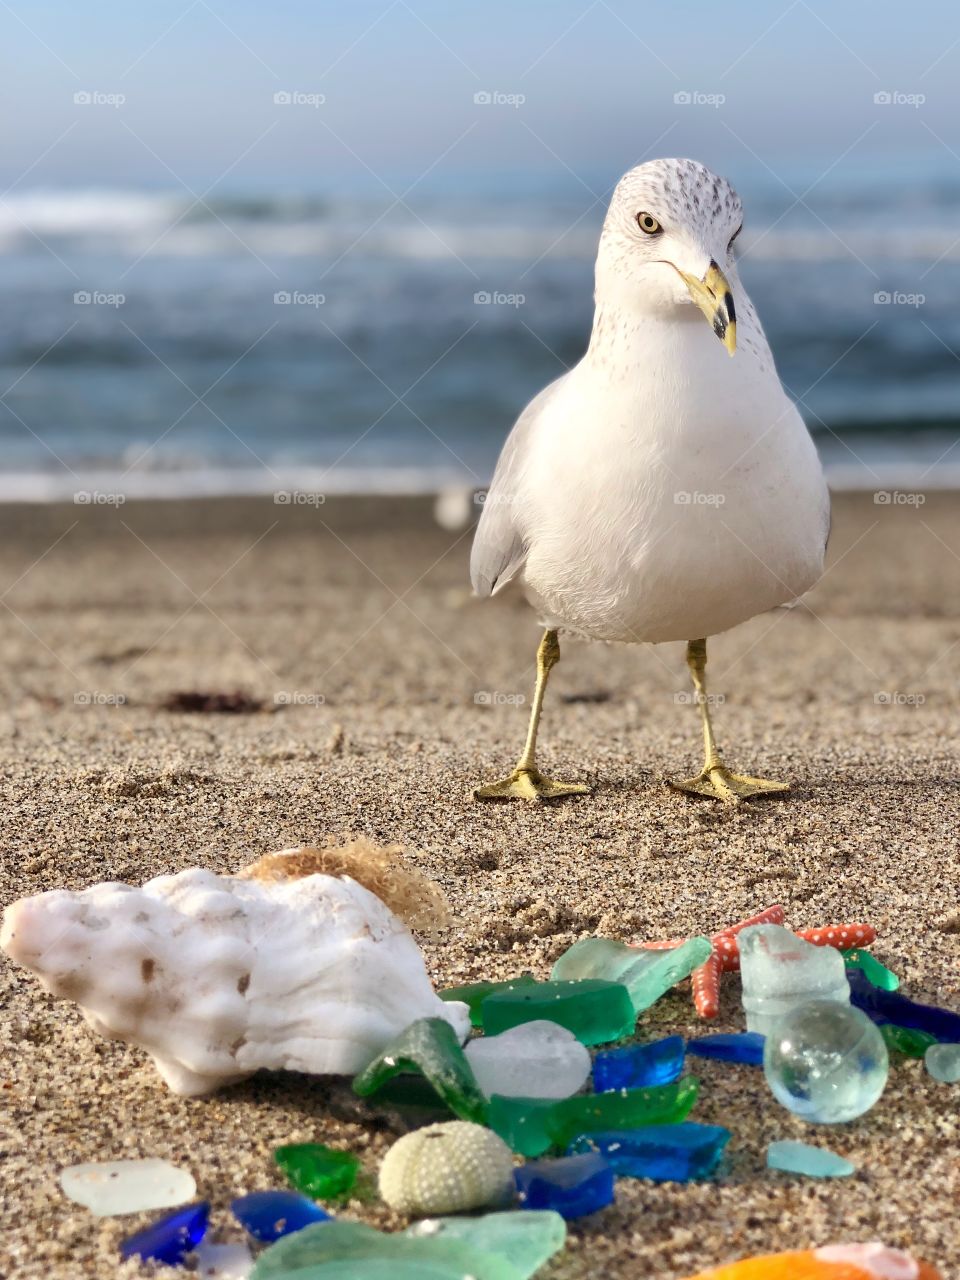 Seagull and his Collection of Beach Glass and Shells! Show us Your Hobby Premium Mission. I collect beach glass and sea shells and love to photograph these treasures in their natural habitat.